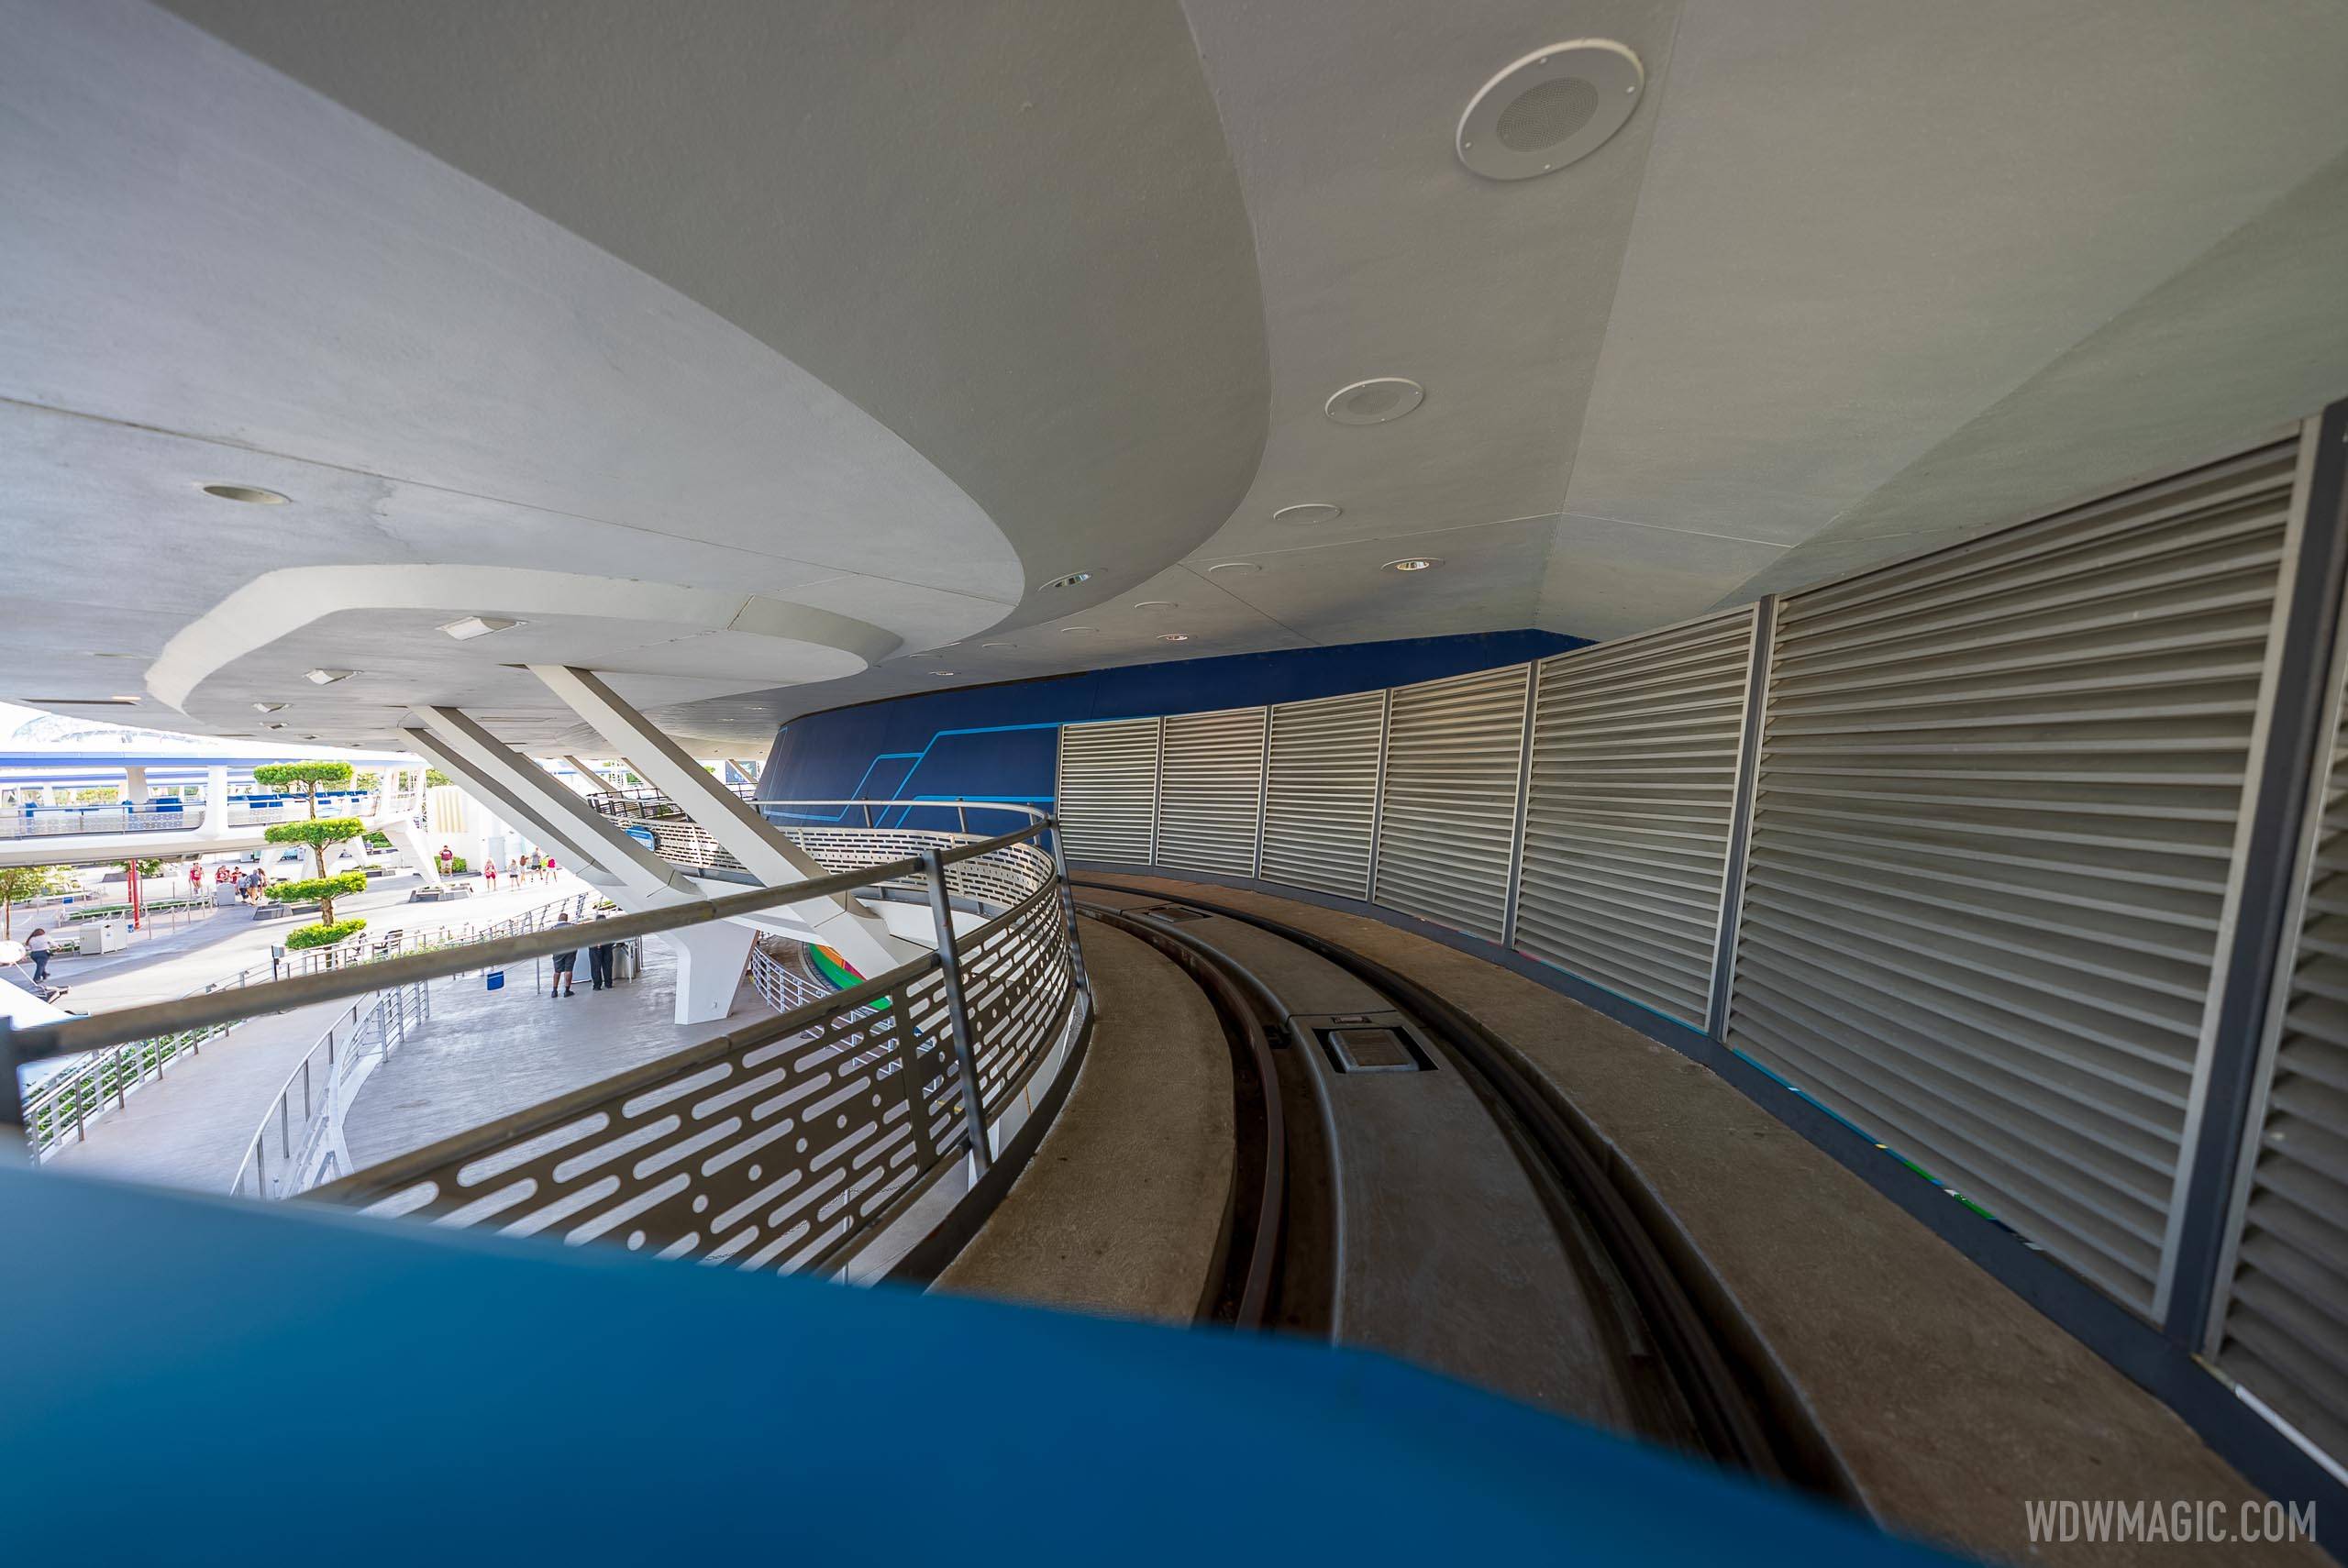 Tomorrowland Transit Authority PeopleMover overview